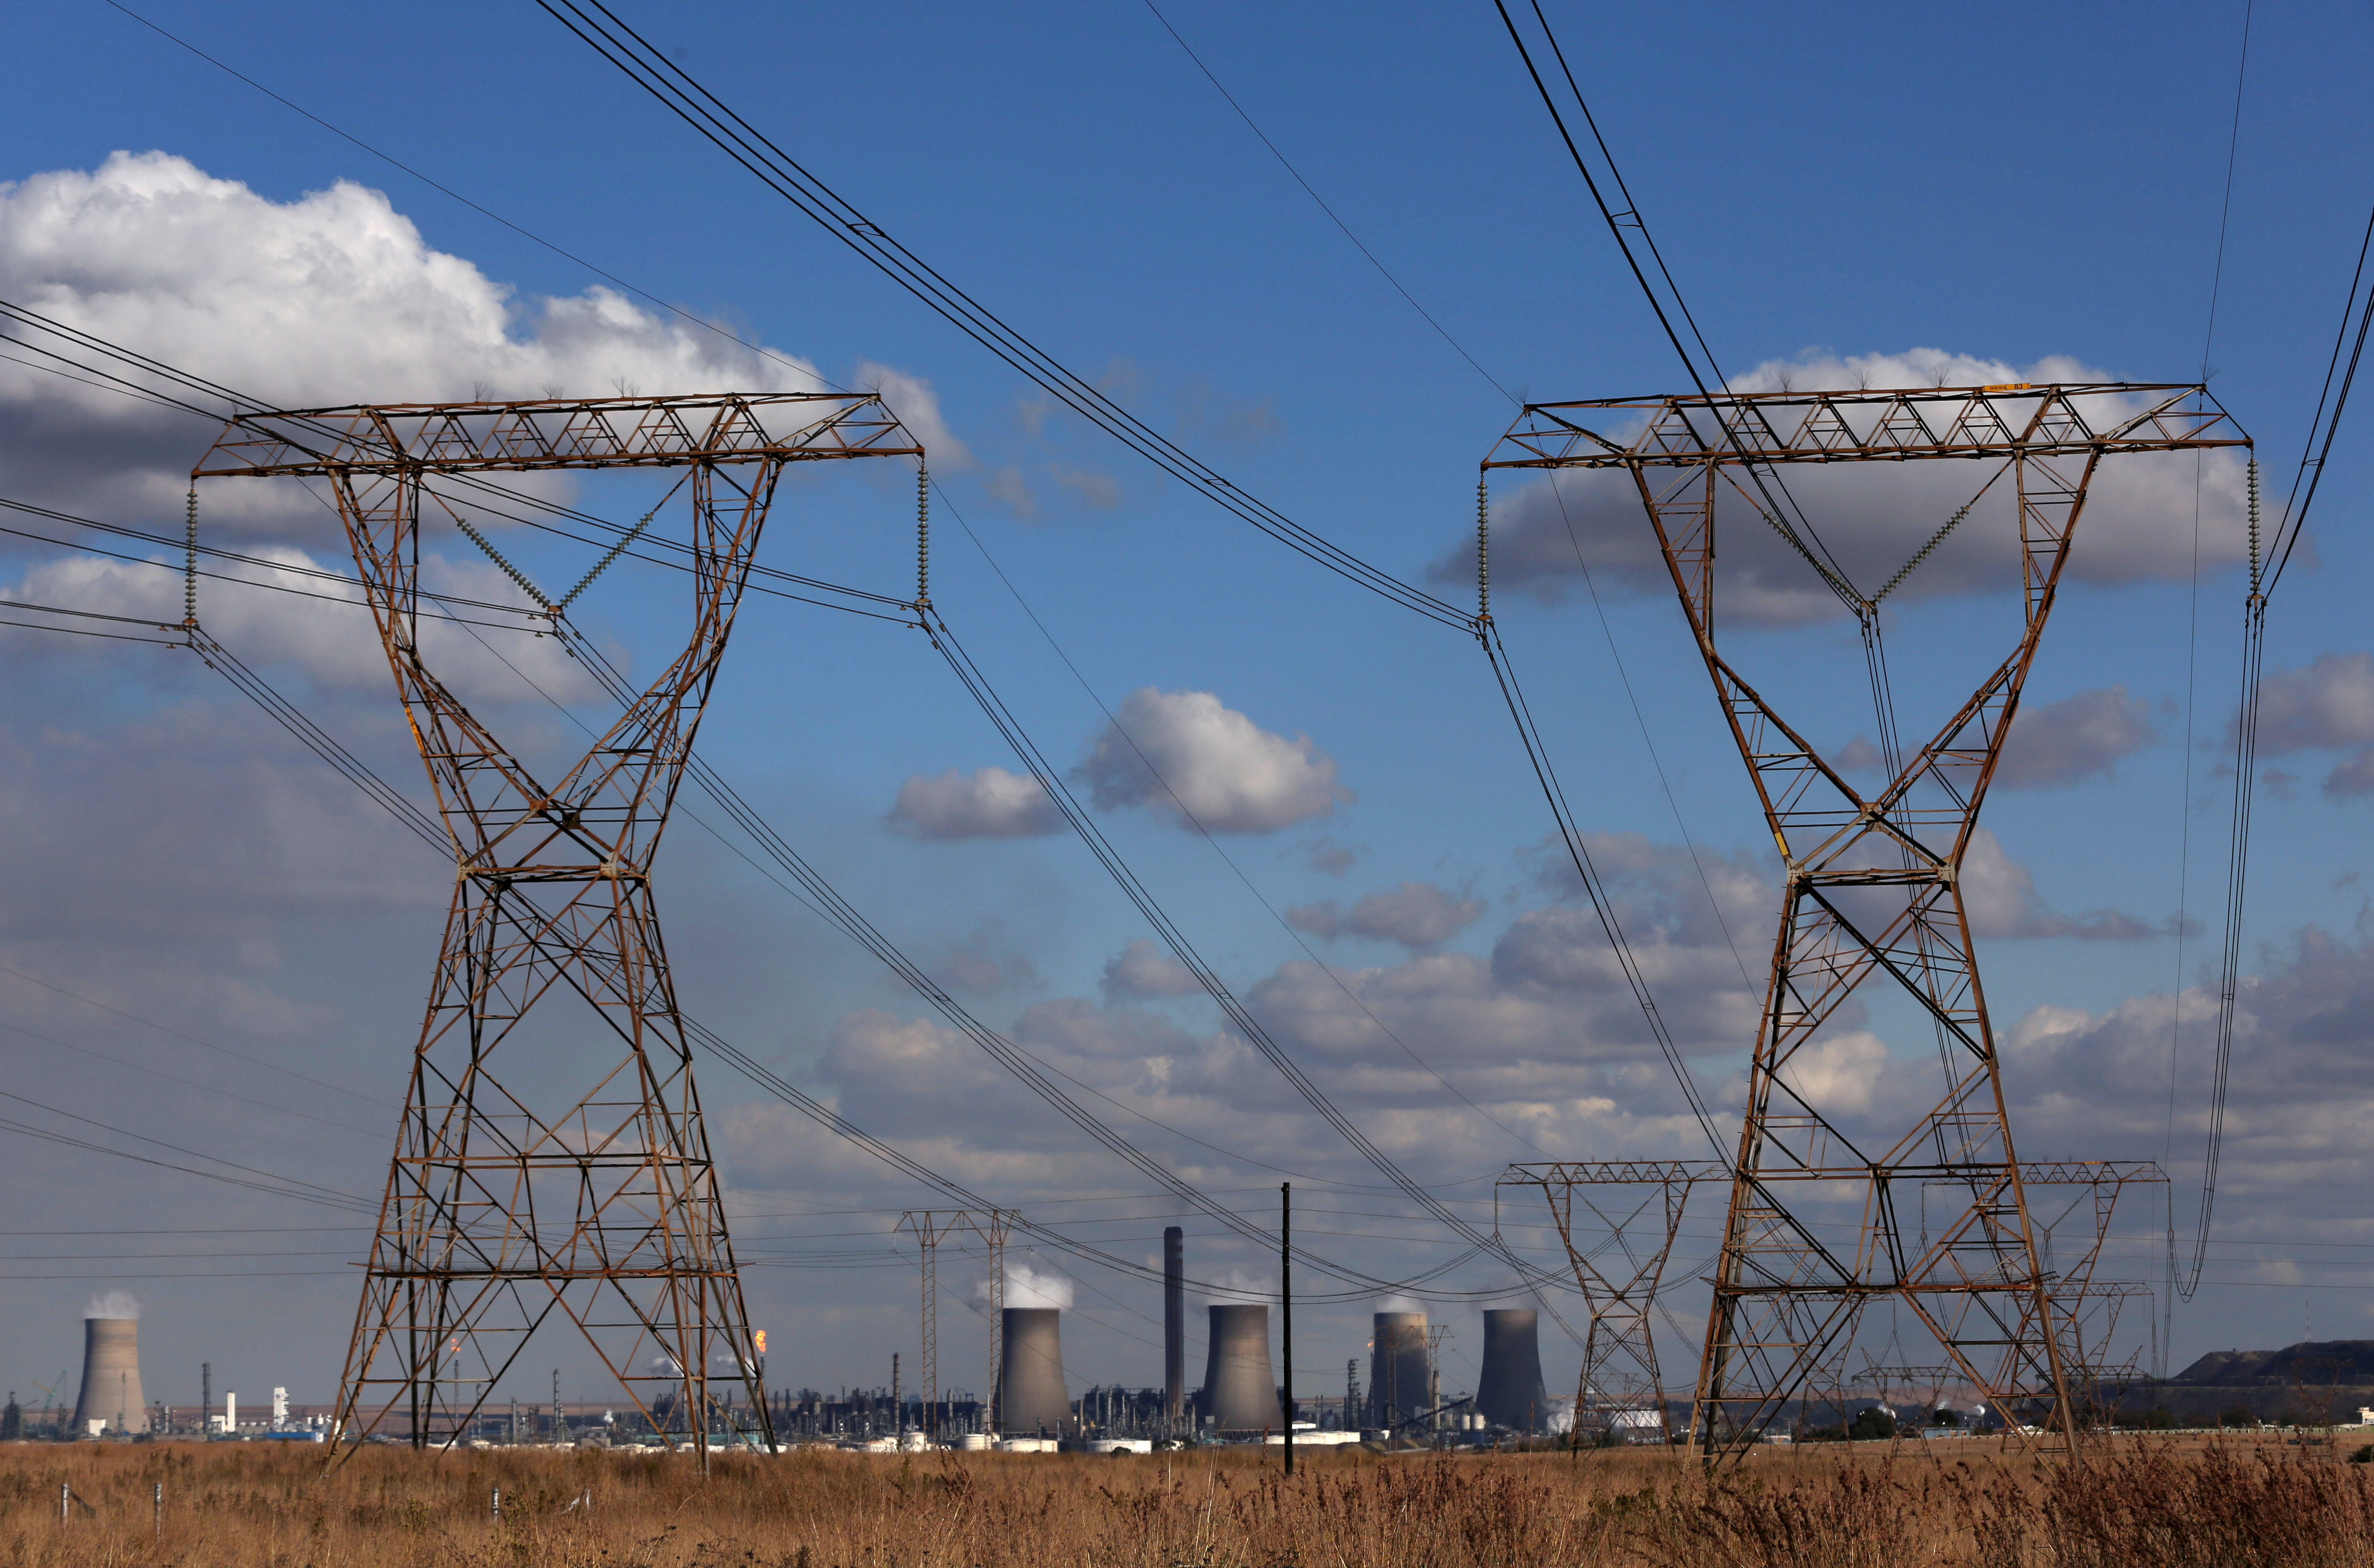 Electricity pylons are seen near cooling towers of South African petrochemical company Sasol's synthetic fuel plant in Secunda, north of Johannesburg